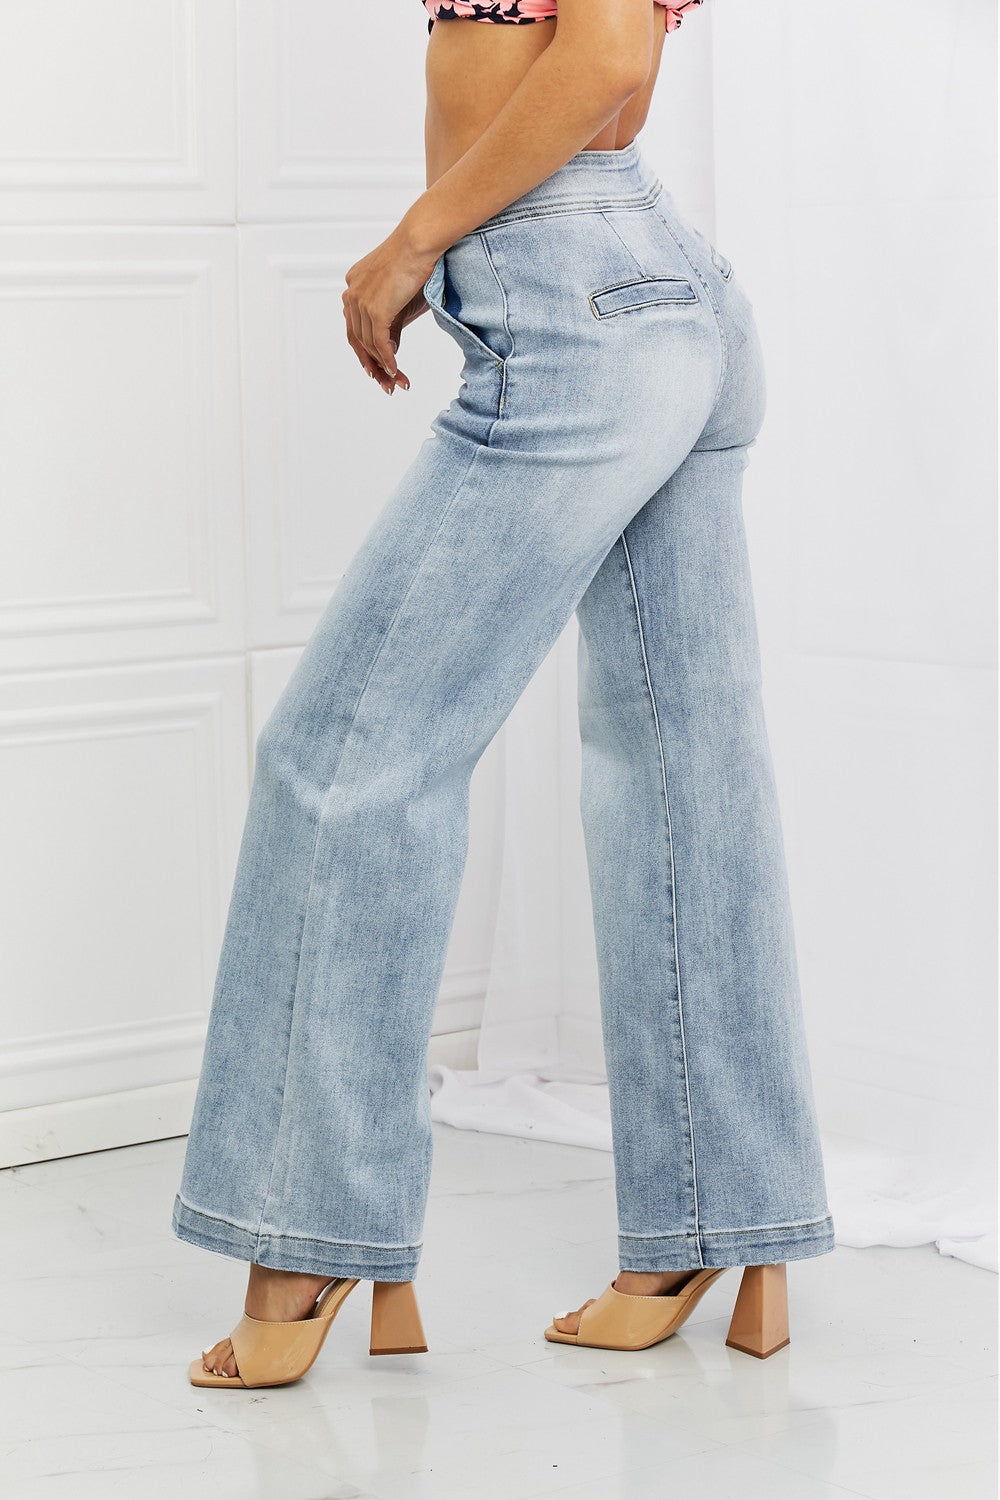 RISEN Luisa Wide Flare Jeans - Online Only